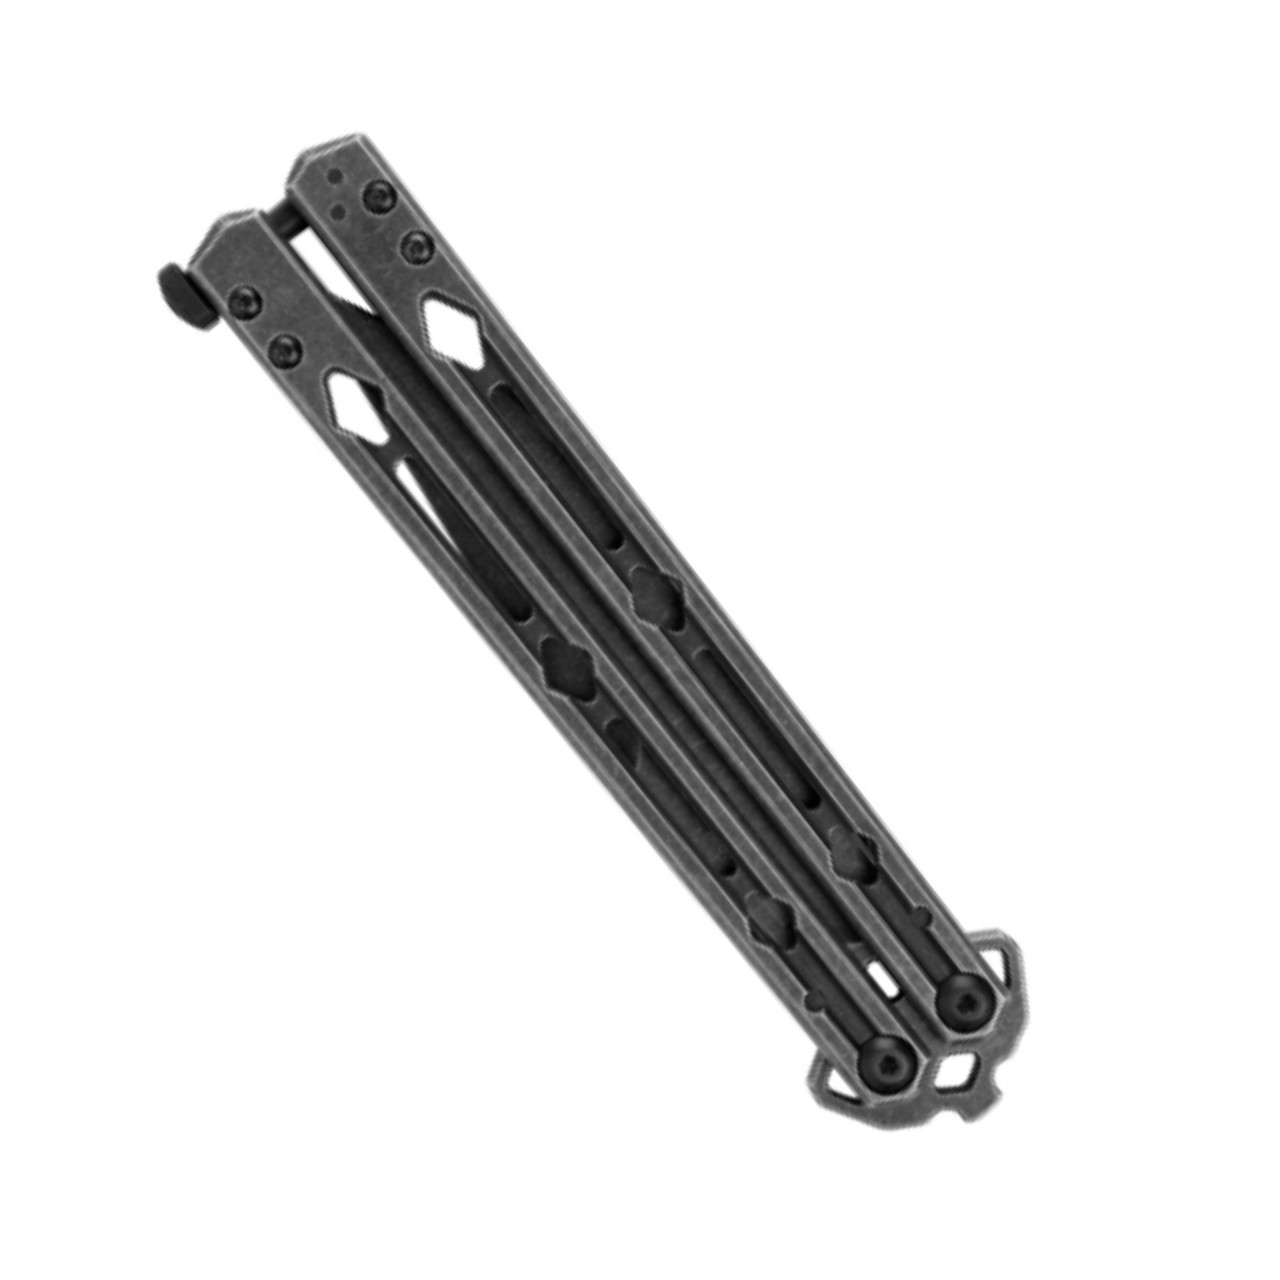 Kershaw 5150BW Lucha Balisong/Butterfly Knife - Knives for Sale